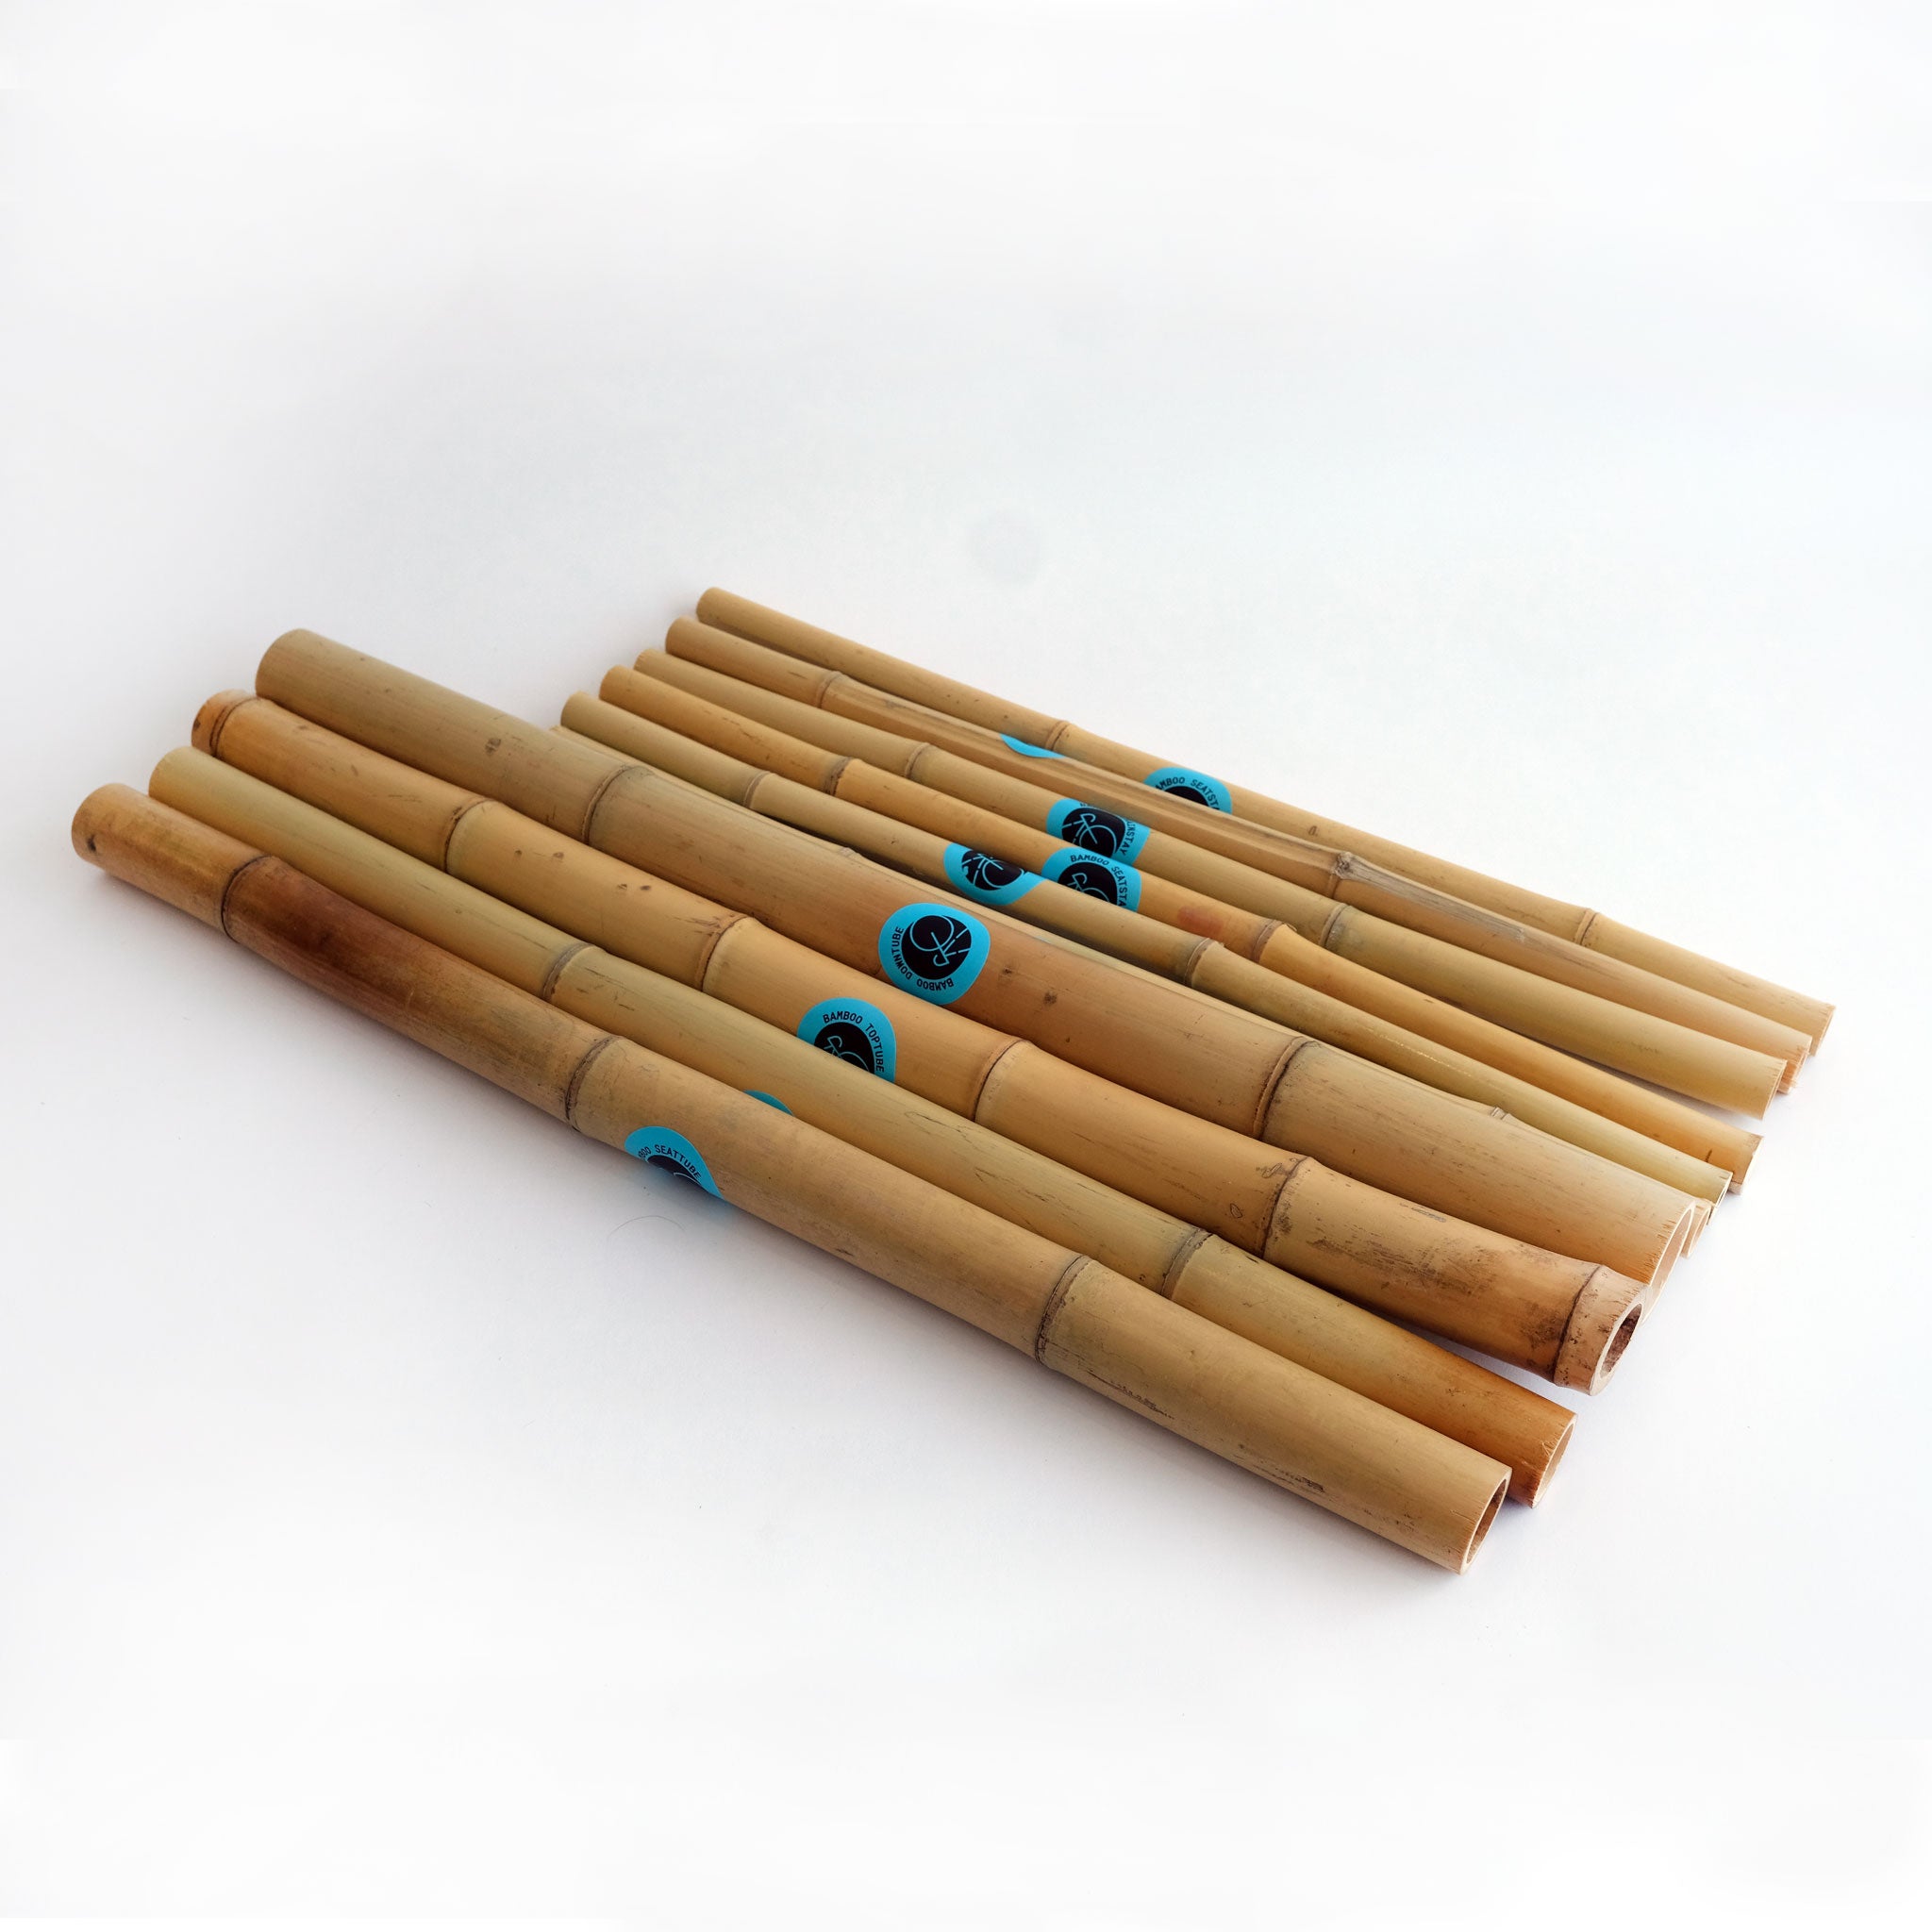 Bamboobicyclematerial_9fb285e5-0e02-4d34-88ee-595f28920f06.jpg